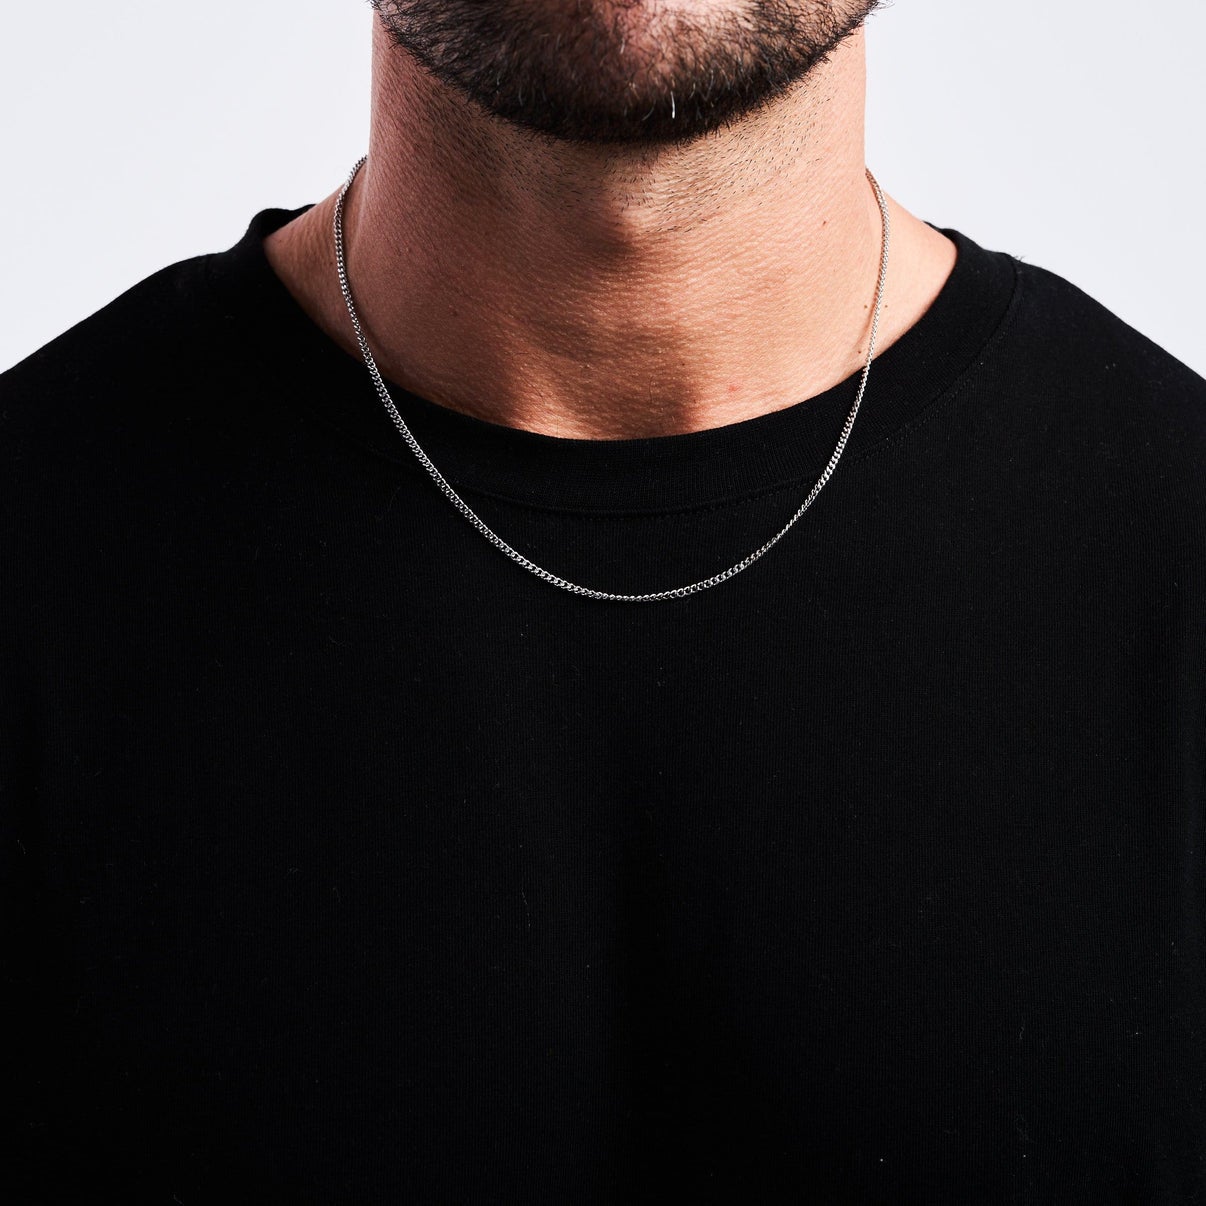 a model wearing a silver chain necklace and a black shirt